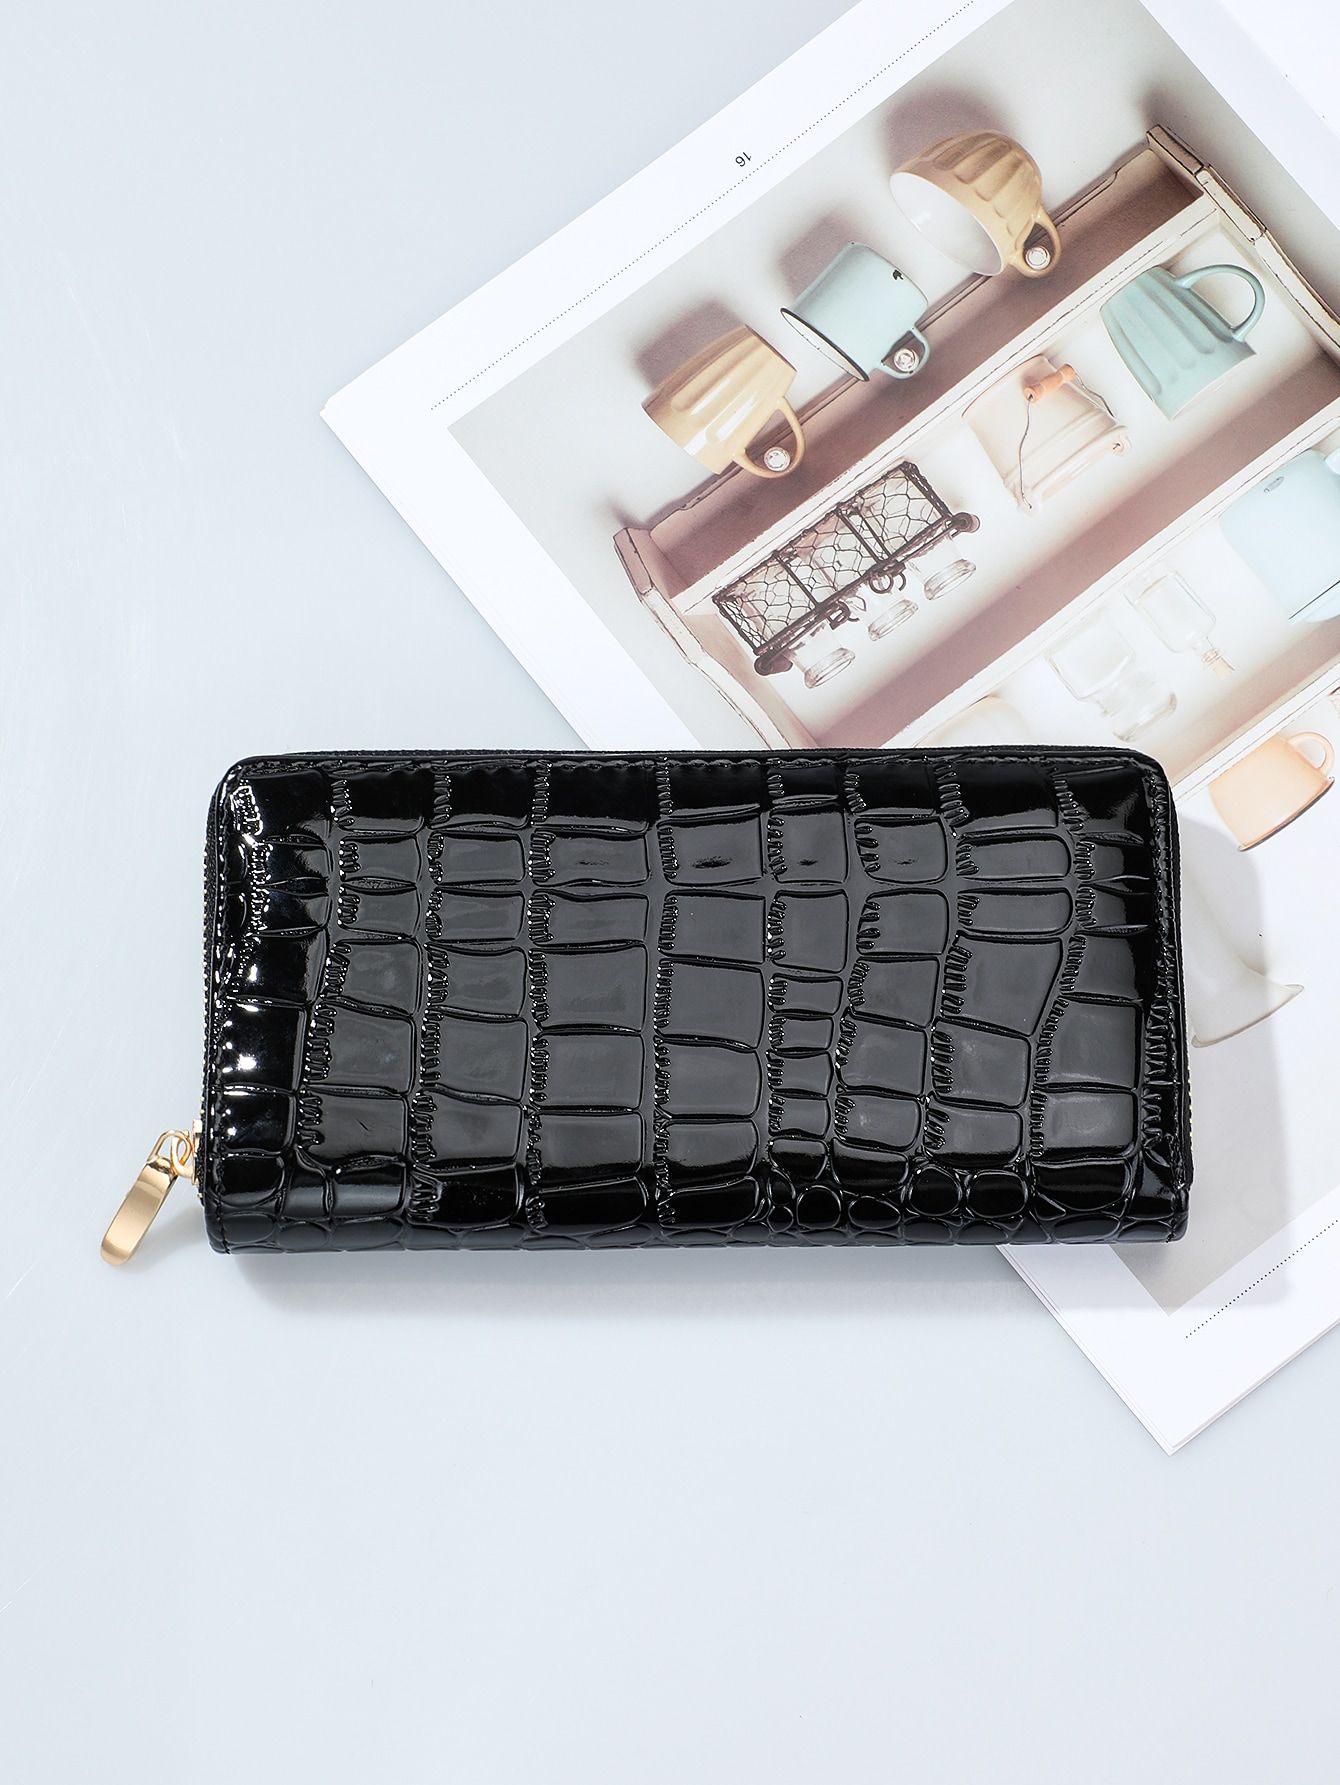 Crocodile Wallets: Exude Luxury with Exotic Leather Accessories